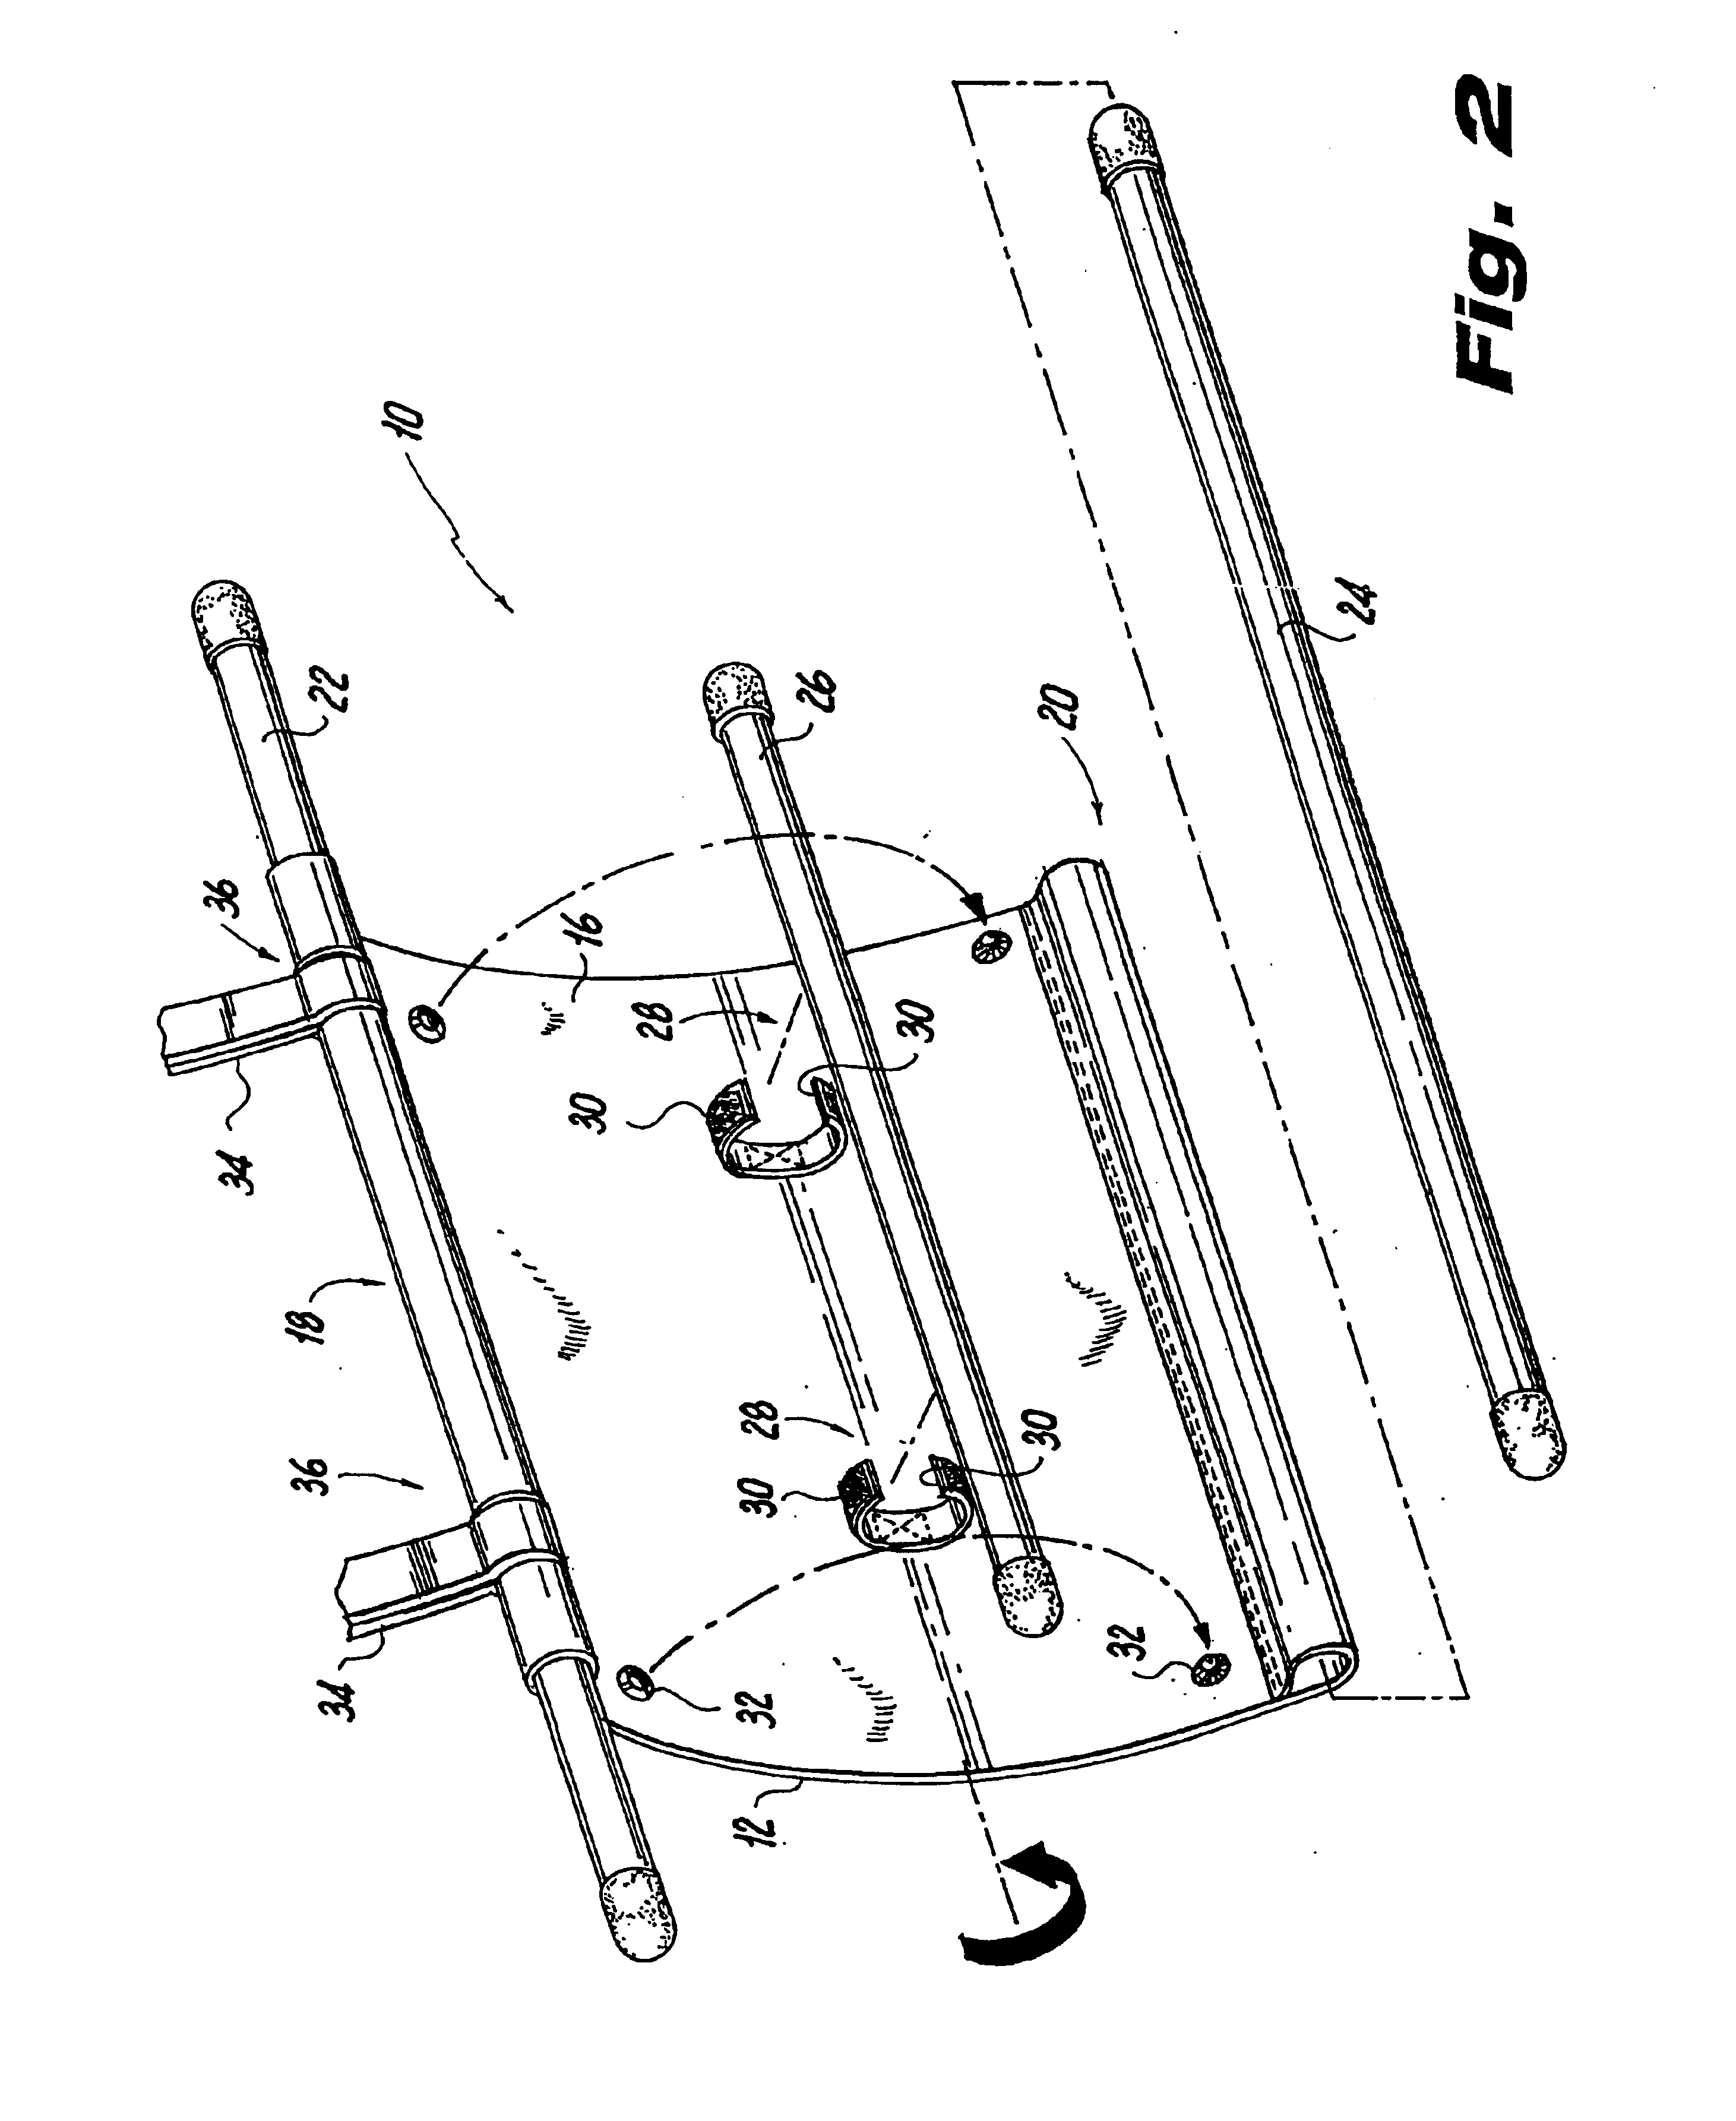 Apparatus for supporting articles on an easel